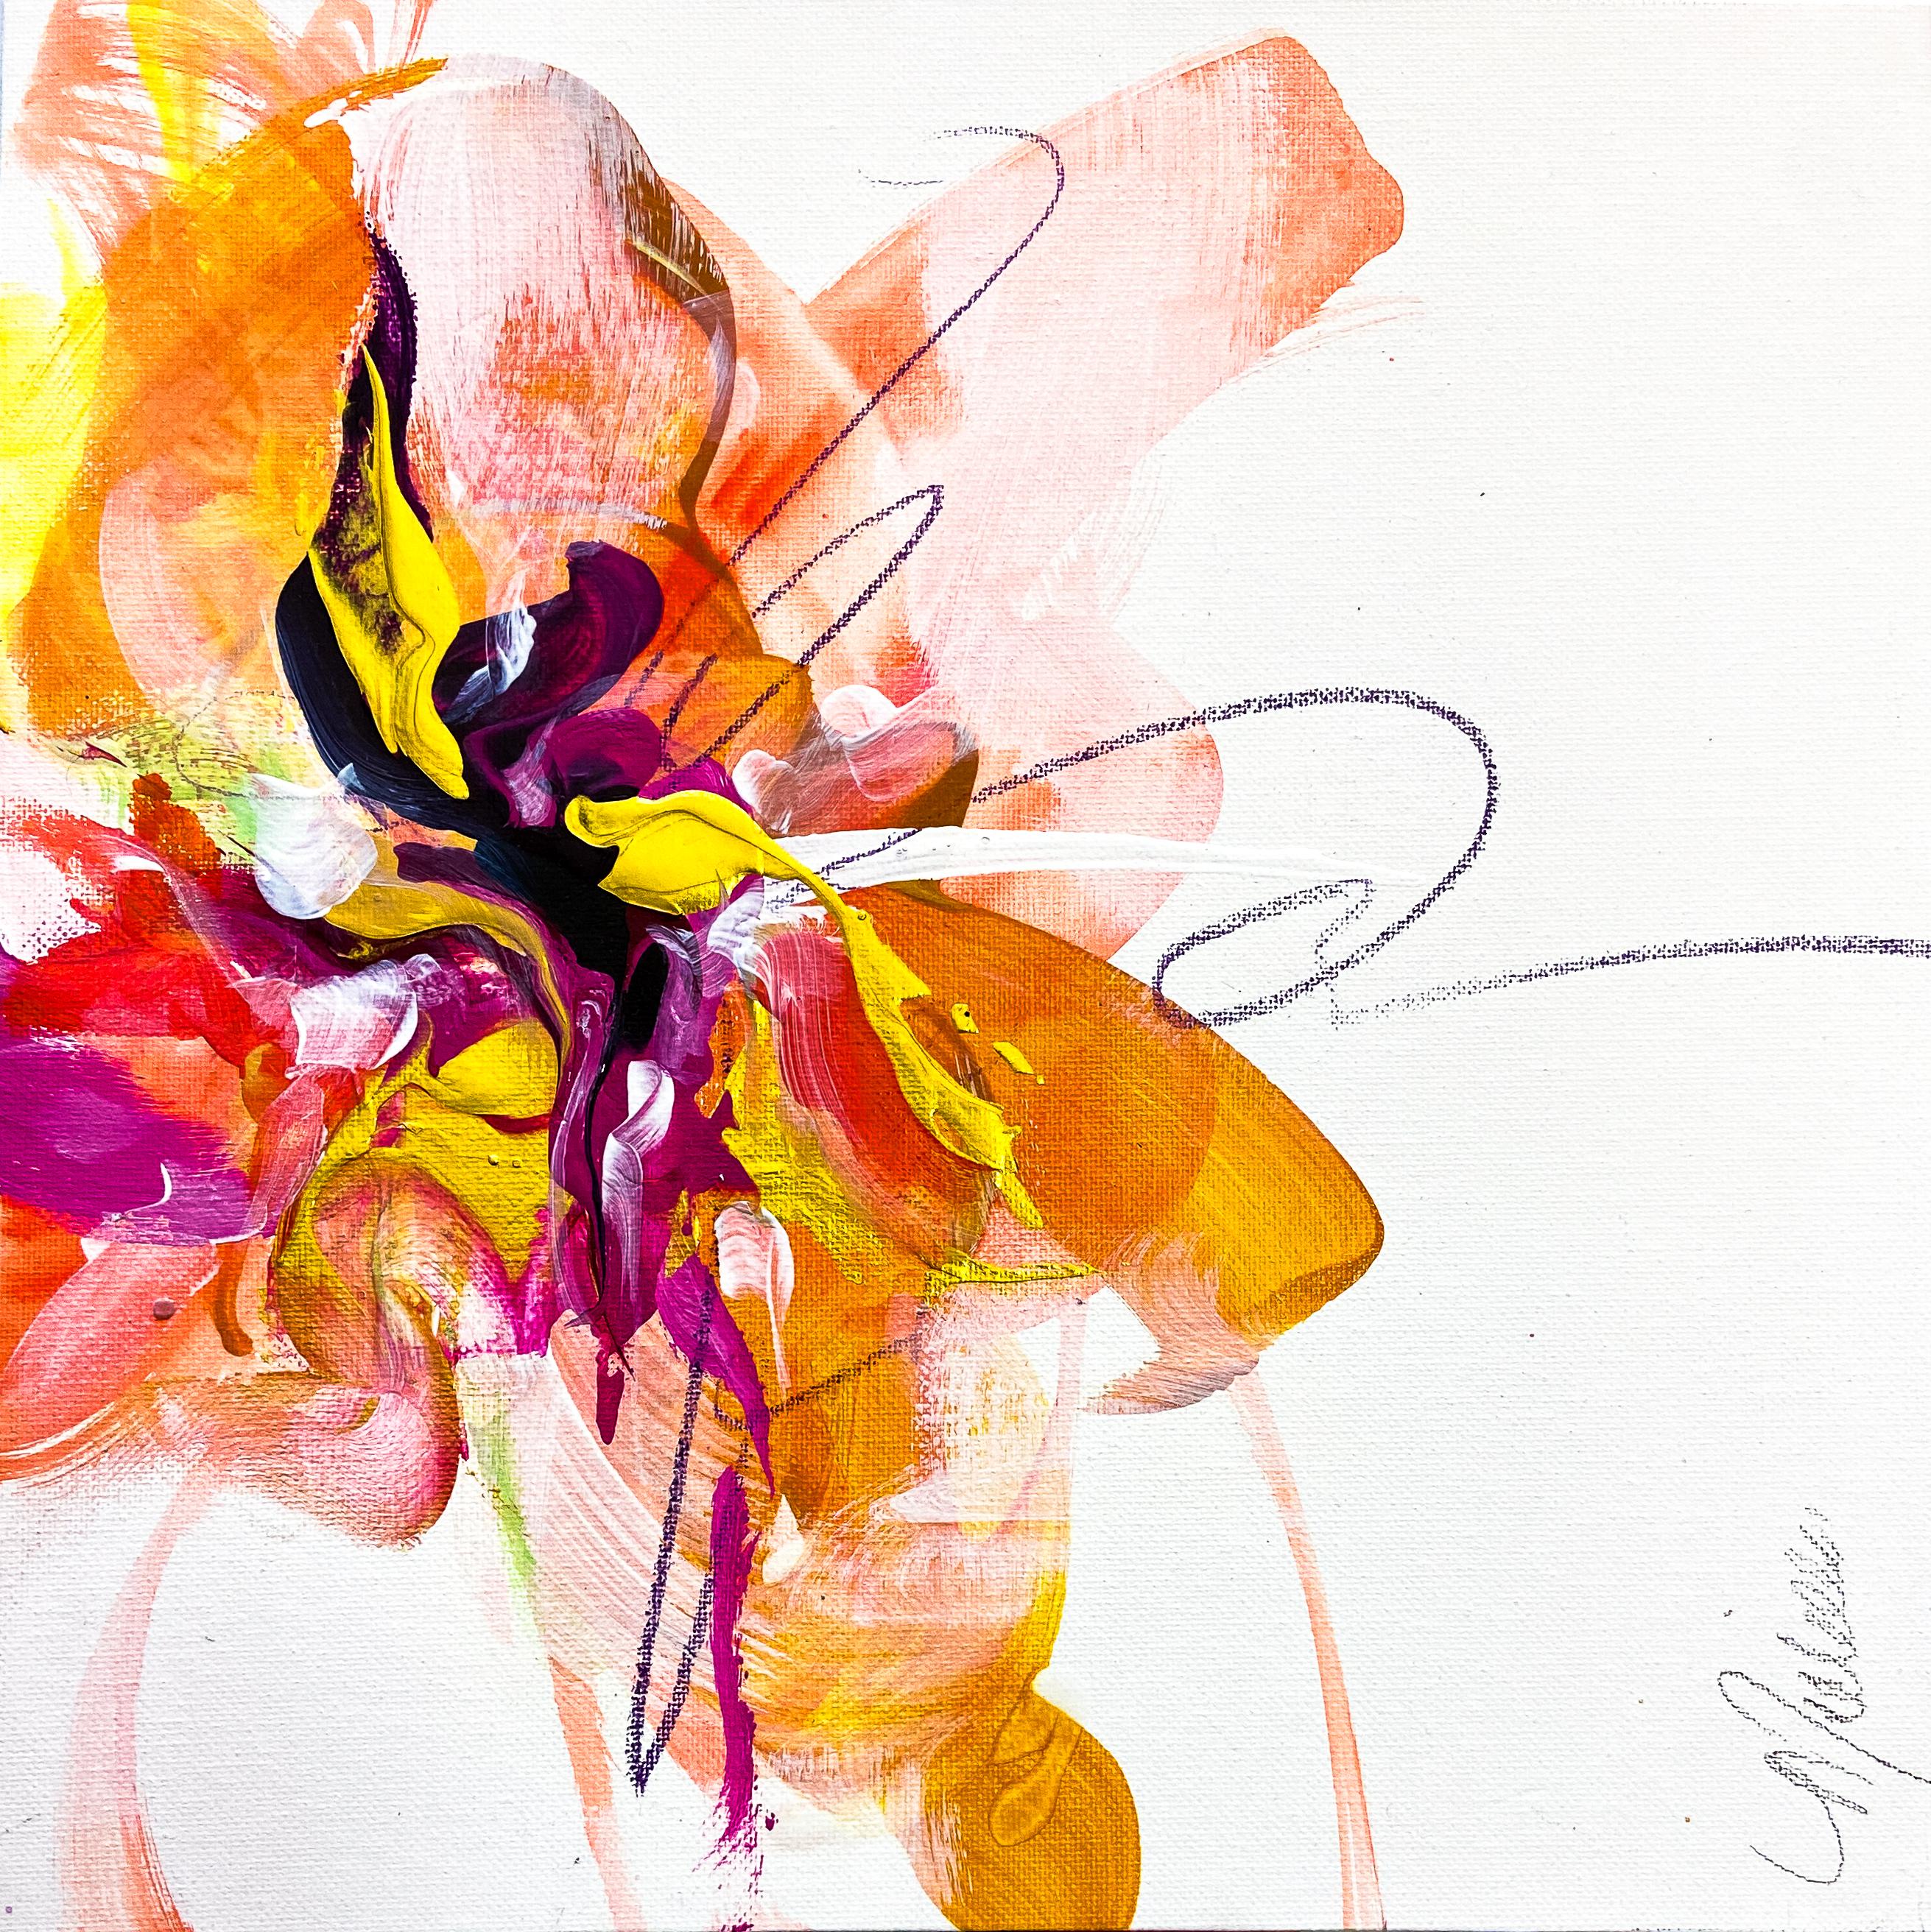 Michelle Thomas Artist Interior Painting - "Que Linda" -  Abstract, Emotional, Modern, Floral, Warm Yellow, Magenta, Gold